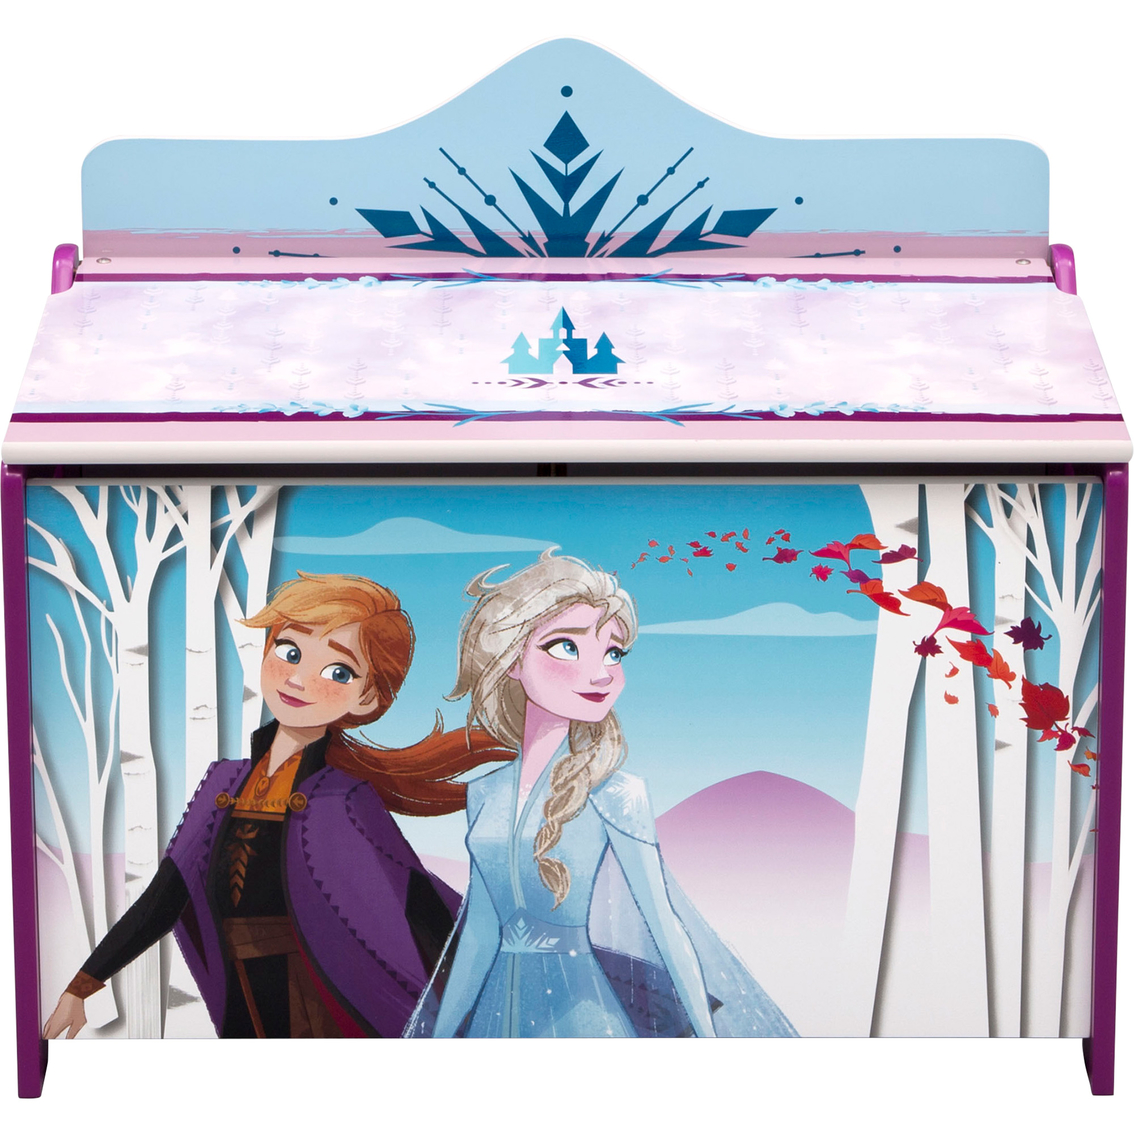 New Bourbon water features 'Frozen' girls and Disney princesses